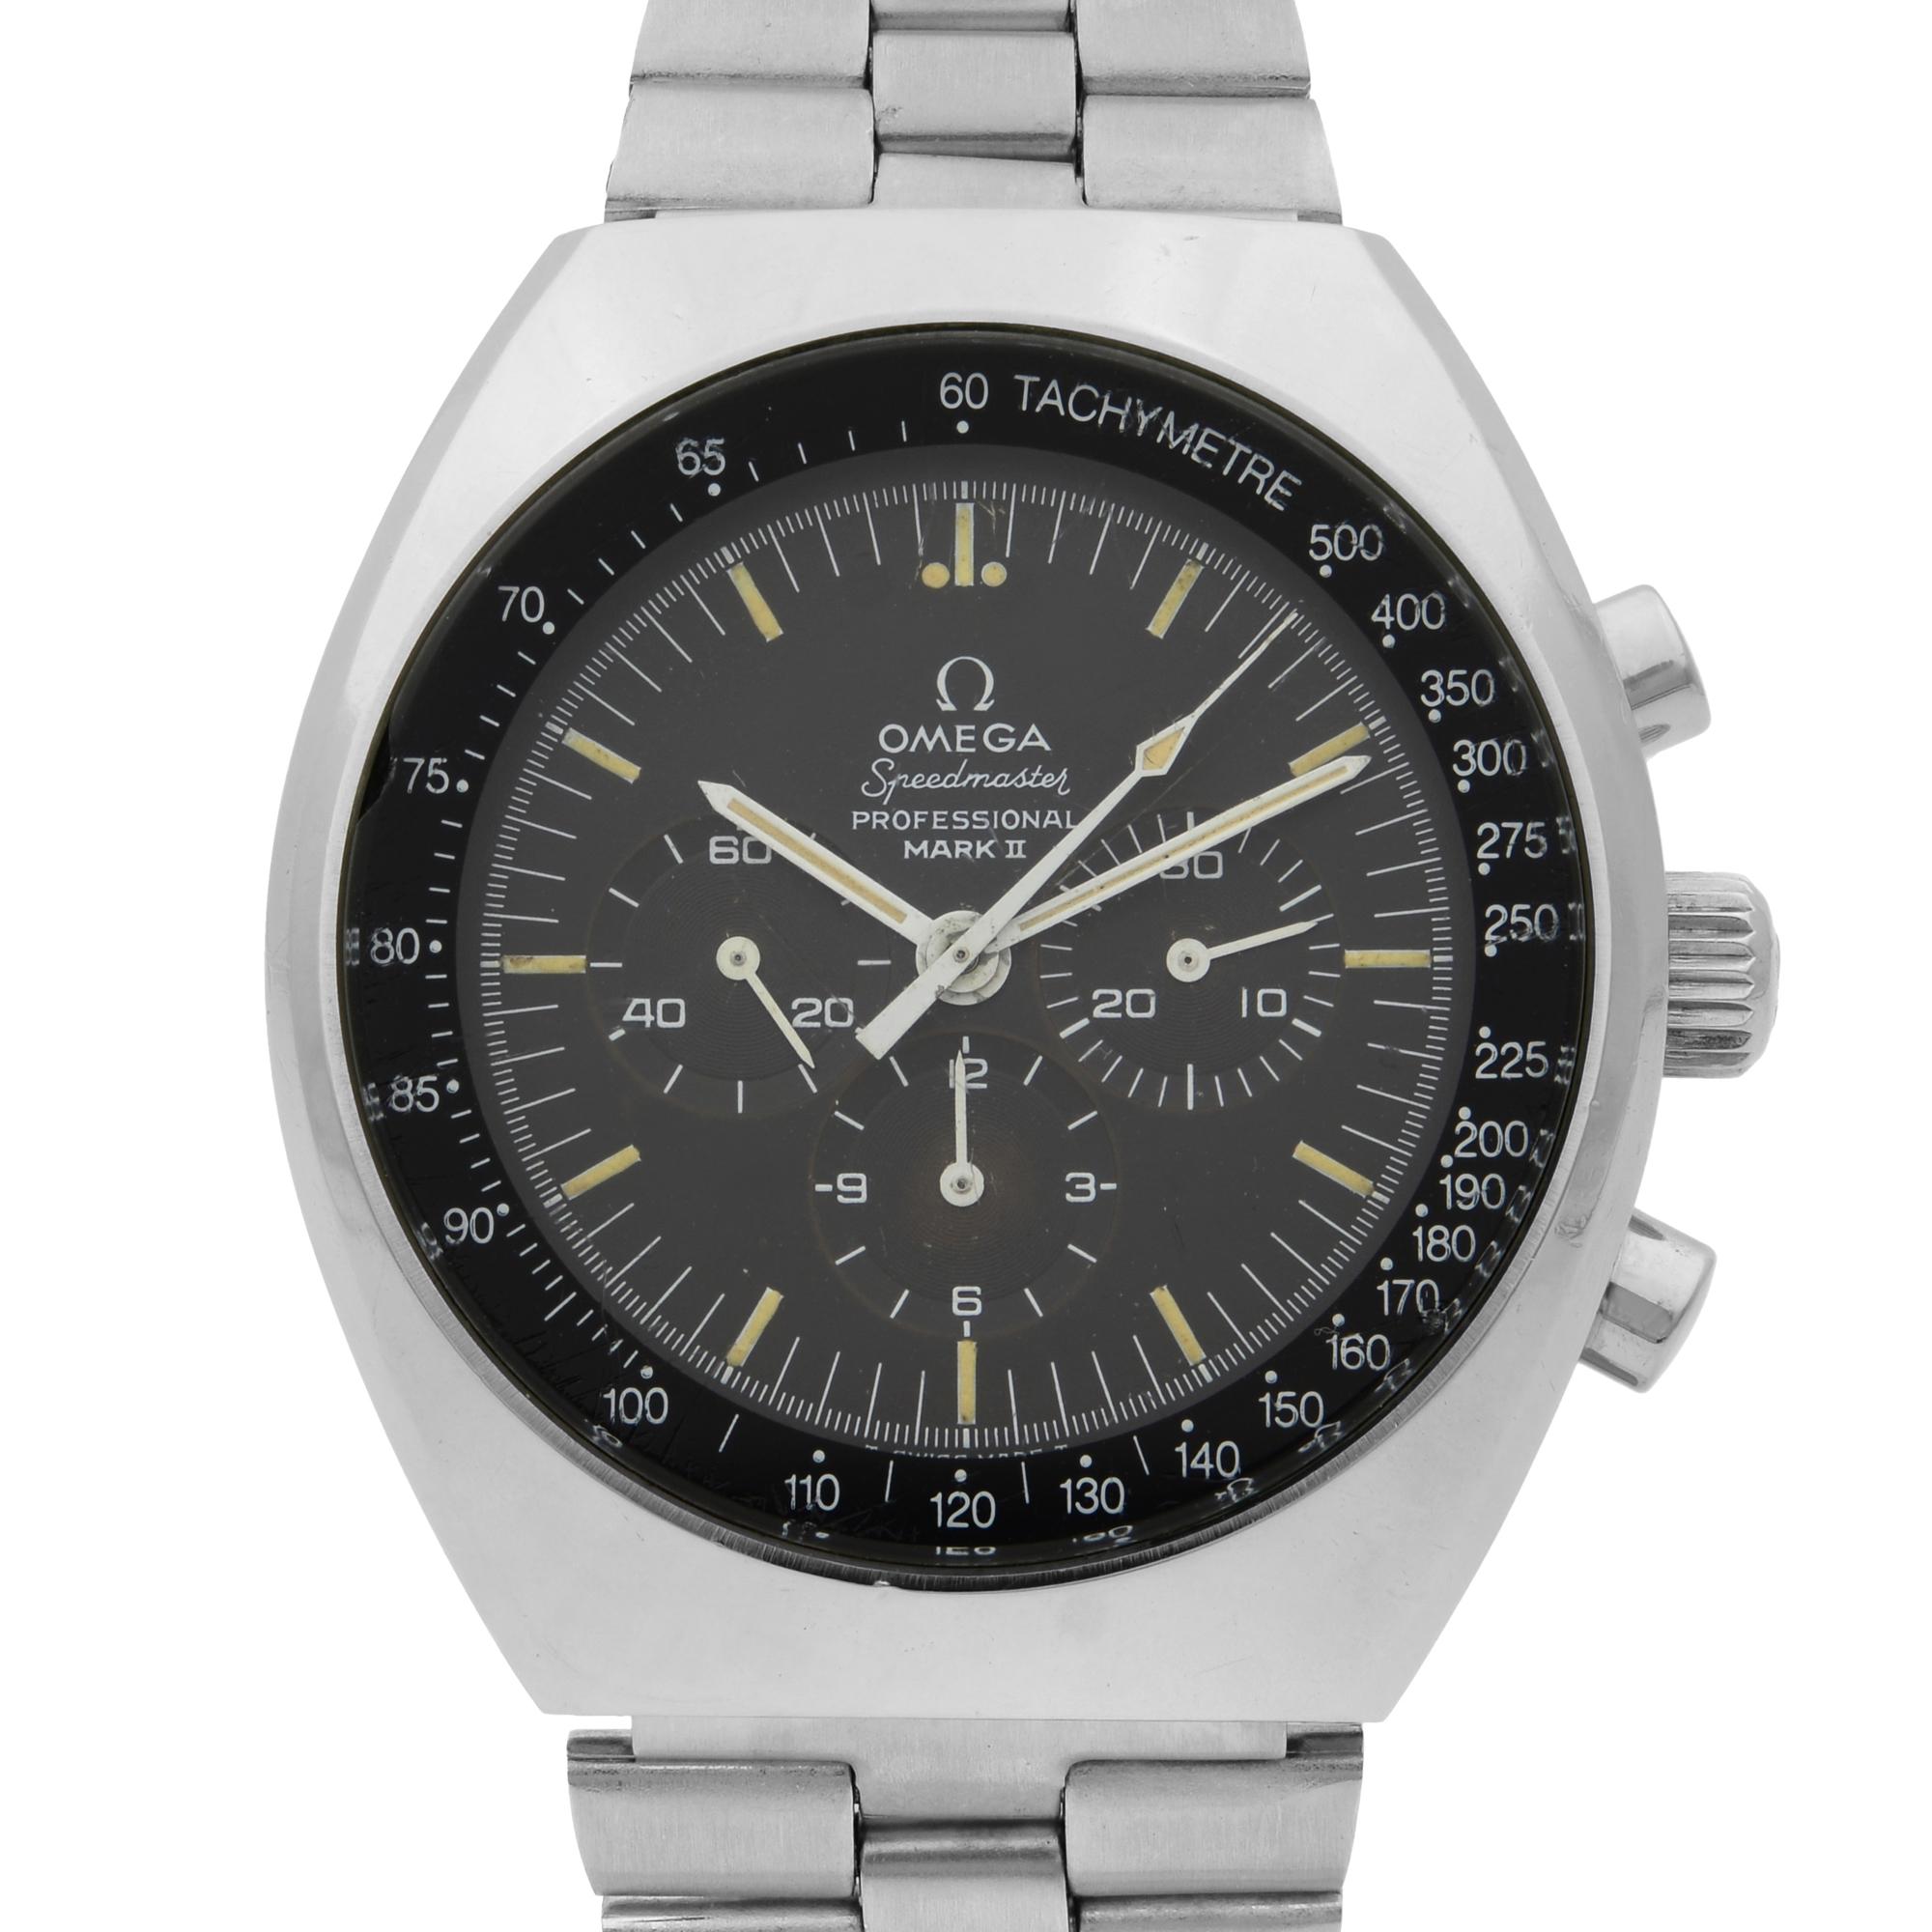 This pre-owned Omega Speedmaster  145.014 is a beautiful men's timepiece that is powered by mechanical (hand-winding) movement which is cased in a stainless steel case. It has a tonneau shape face, small seconds subdial and tachymetre scale dial and